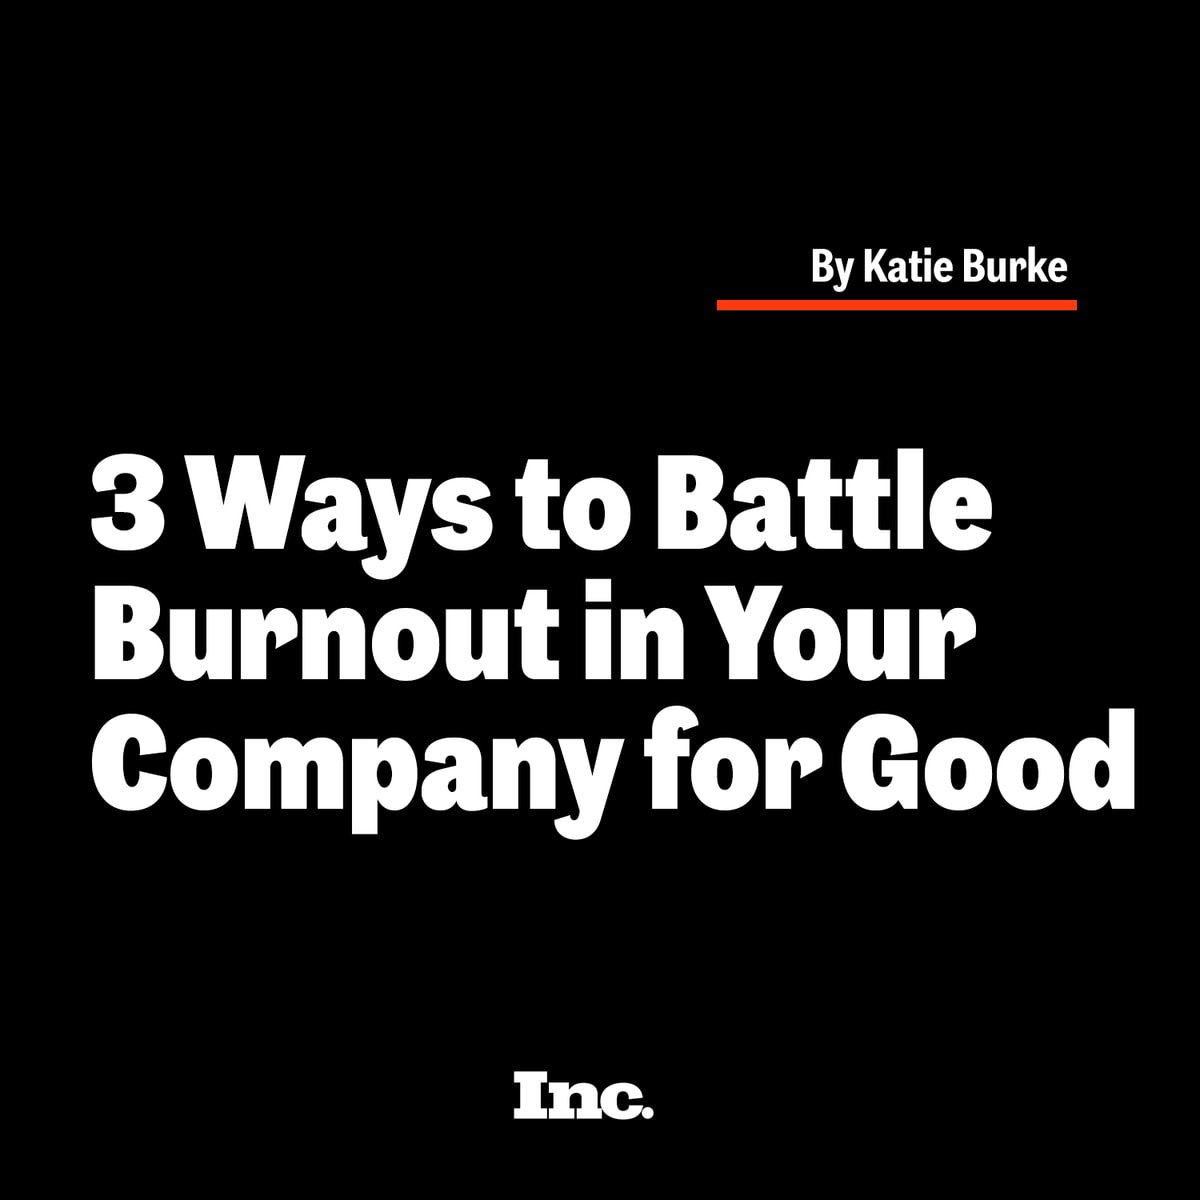 Are your employees still burnt out? These 3 strategies can help drive long-term change.